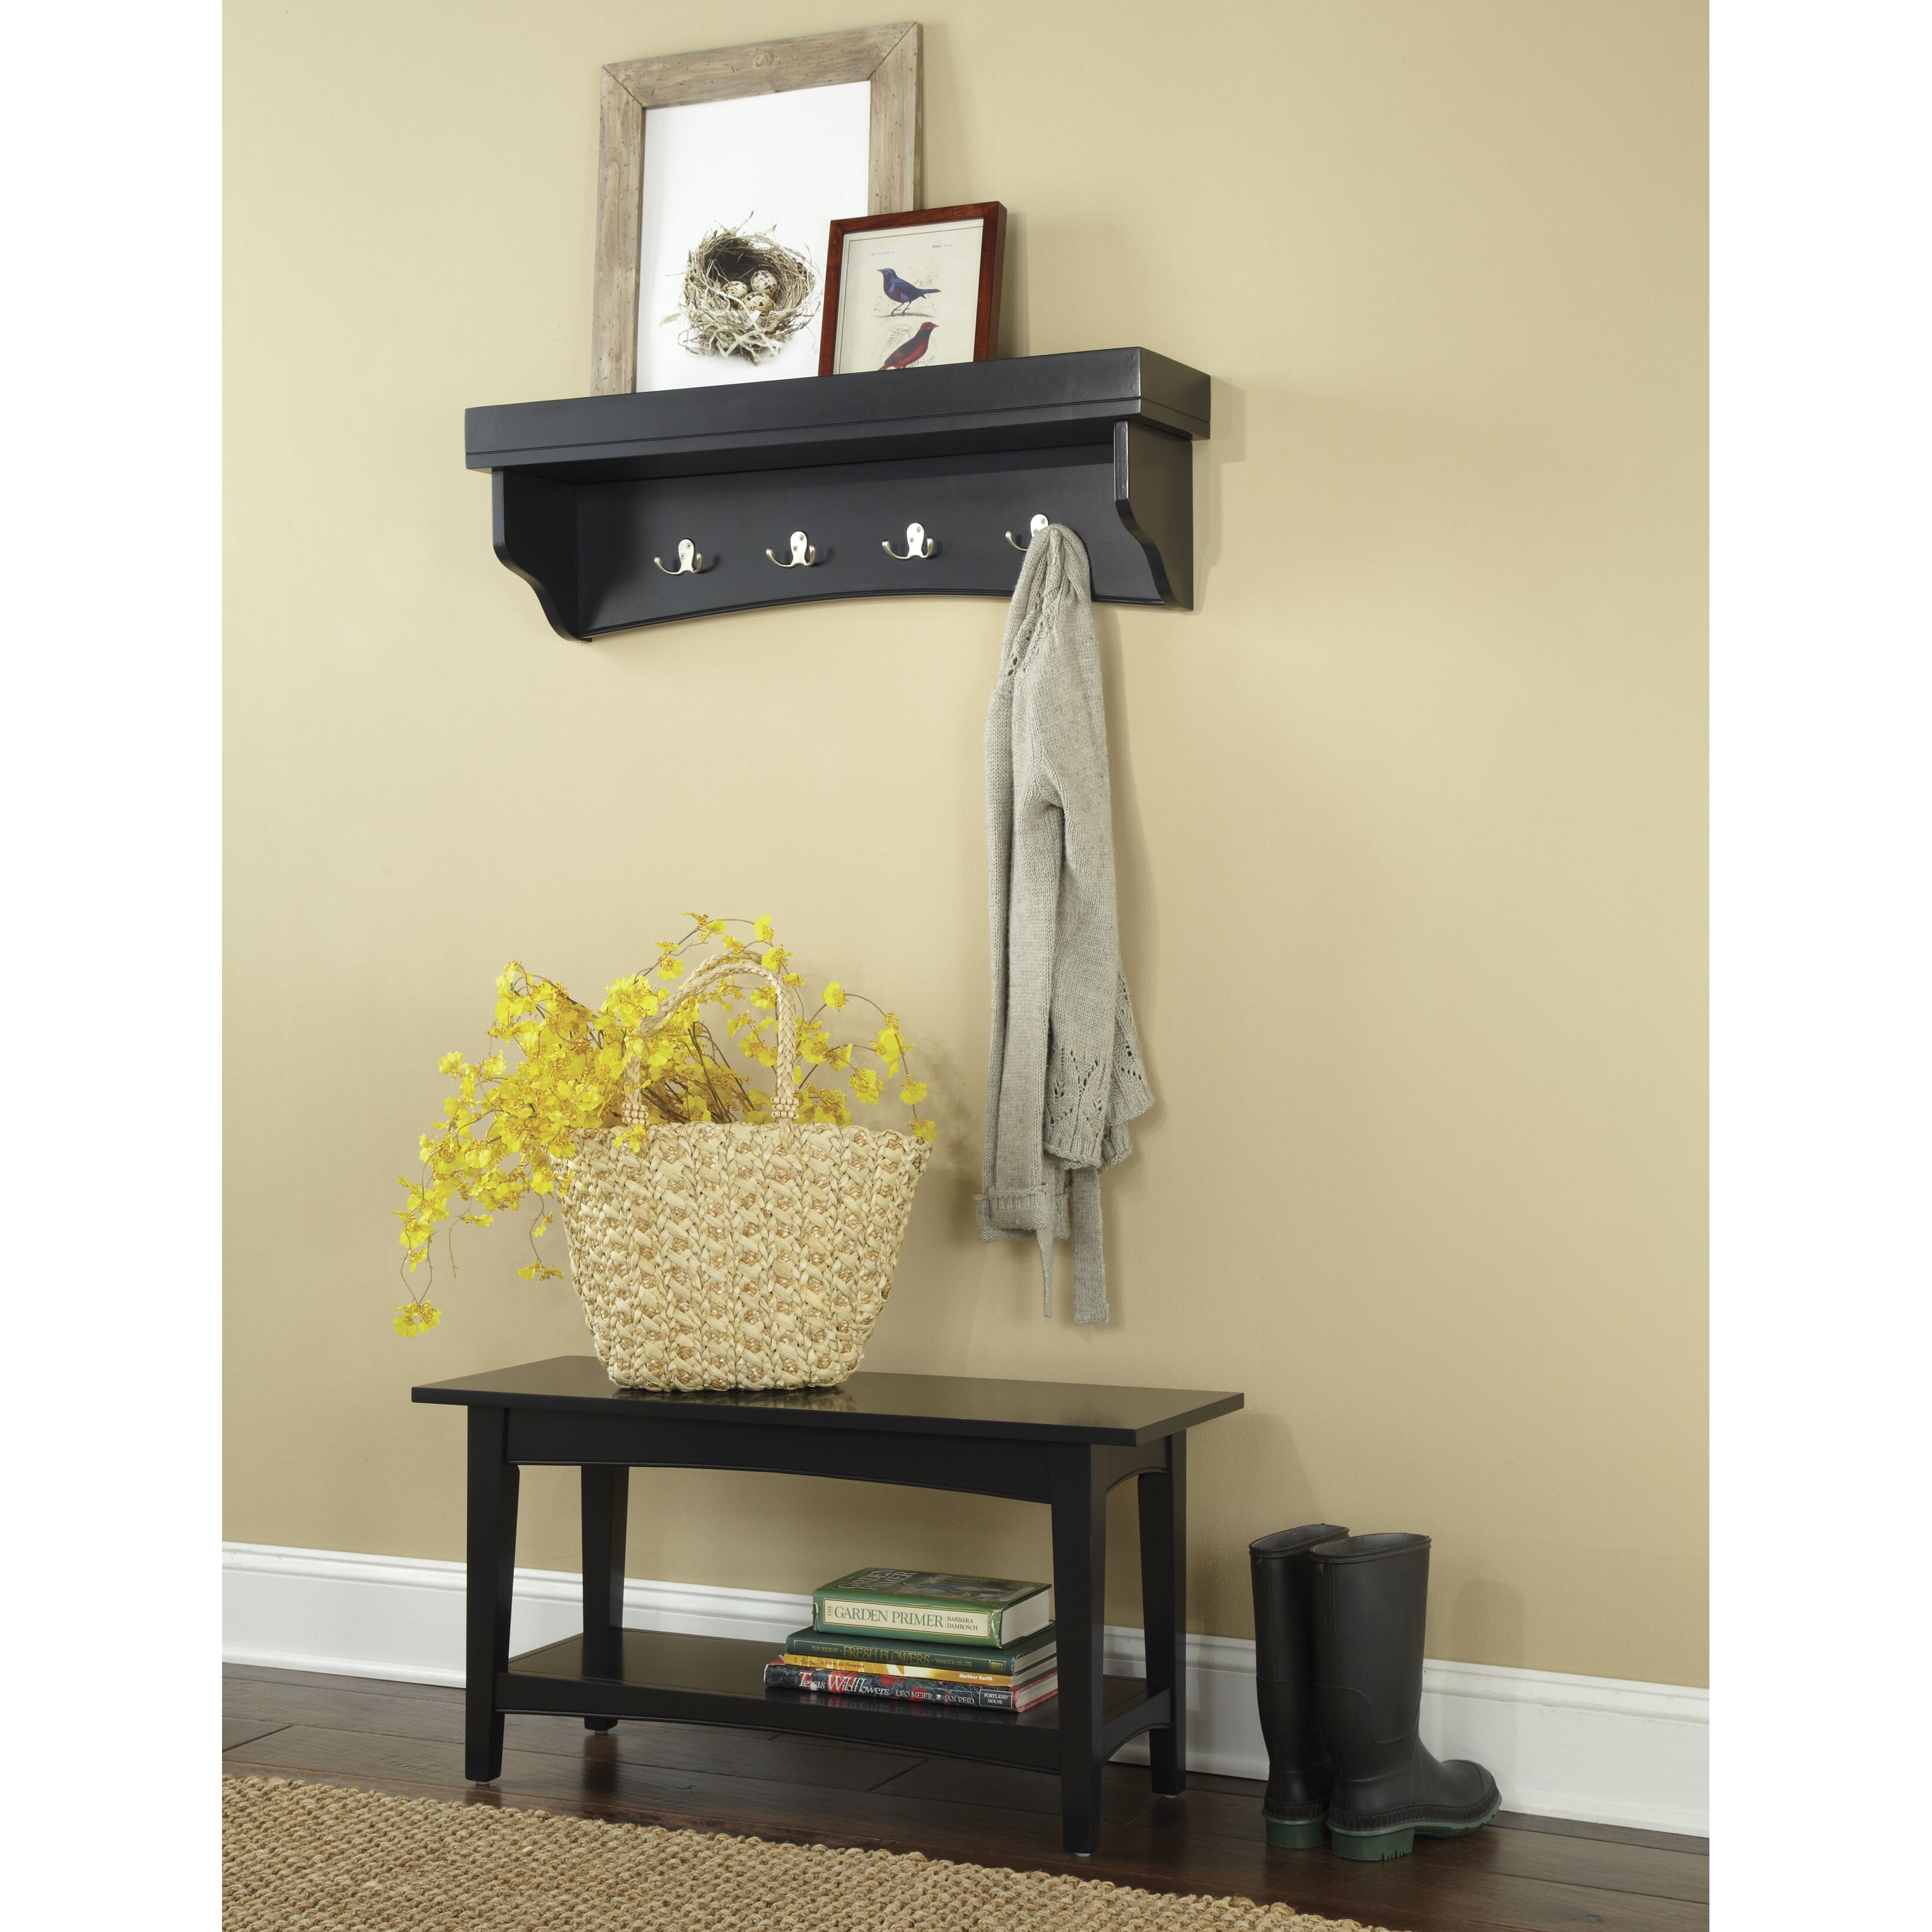 Alcott Hill Bel Air Piece Hall Tree Coat Hook And Bench Set & Reviews